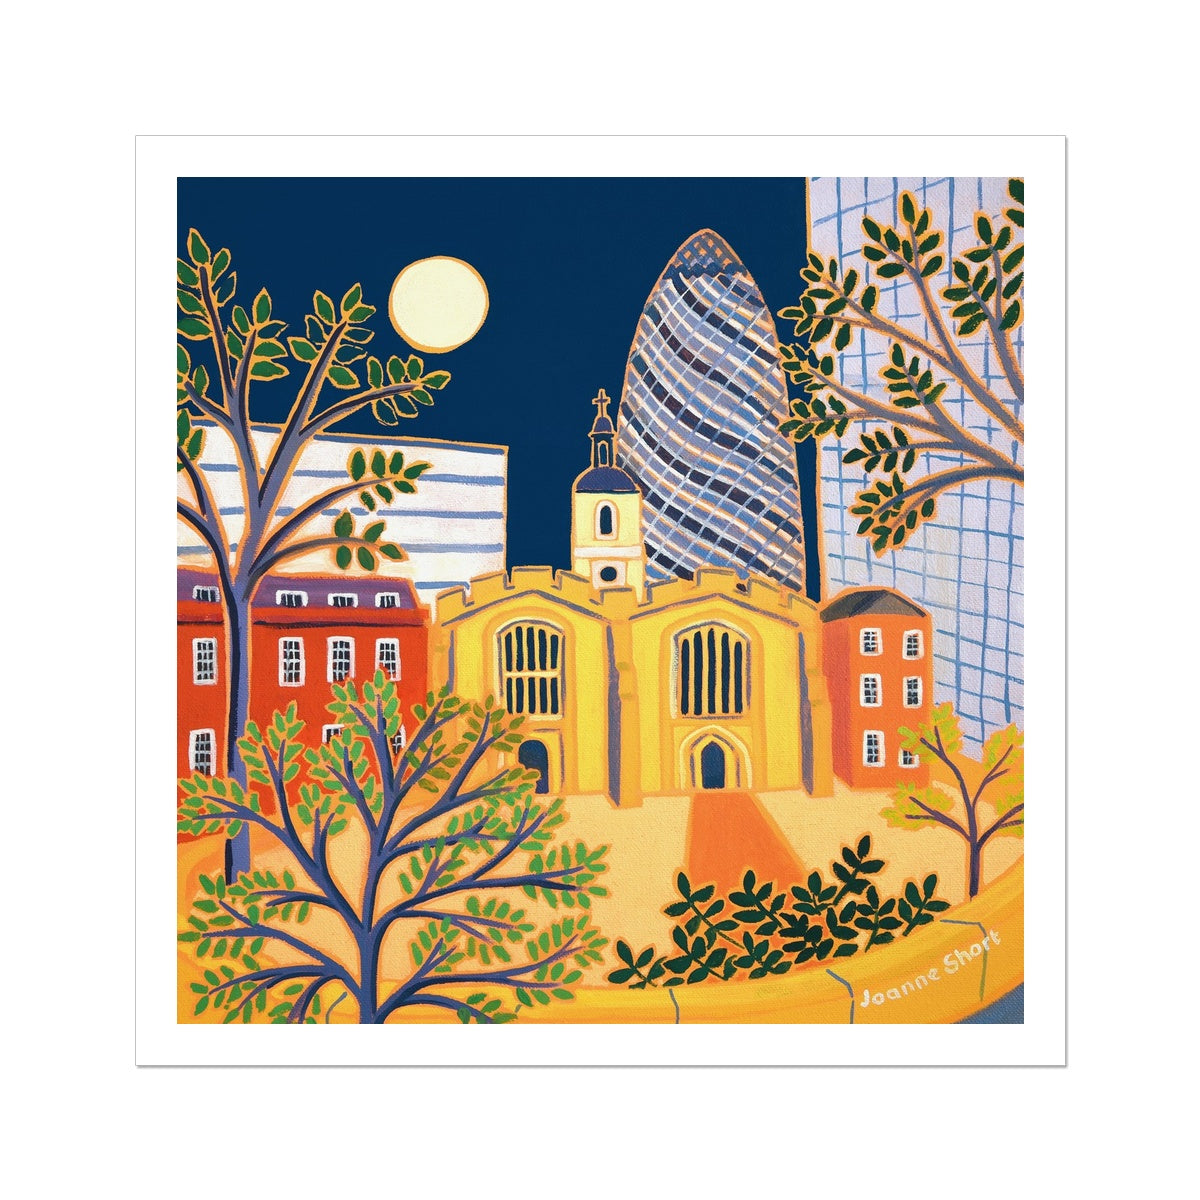 Joanne Short Fine Art Open Edition London Art Print 'The Old and the New, St Helen's Bishopsgate Church & The Gherkin London'.